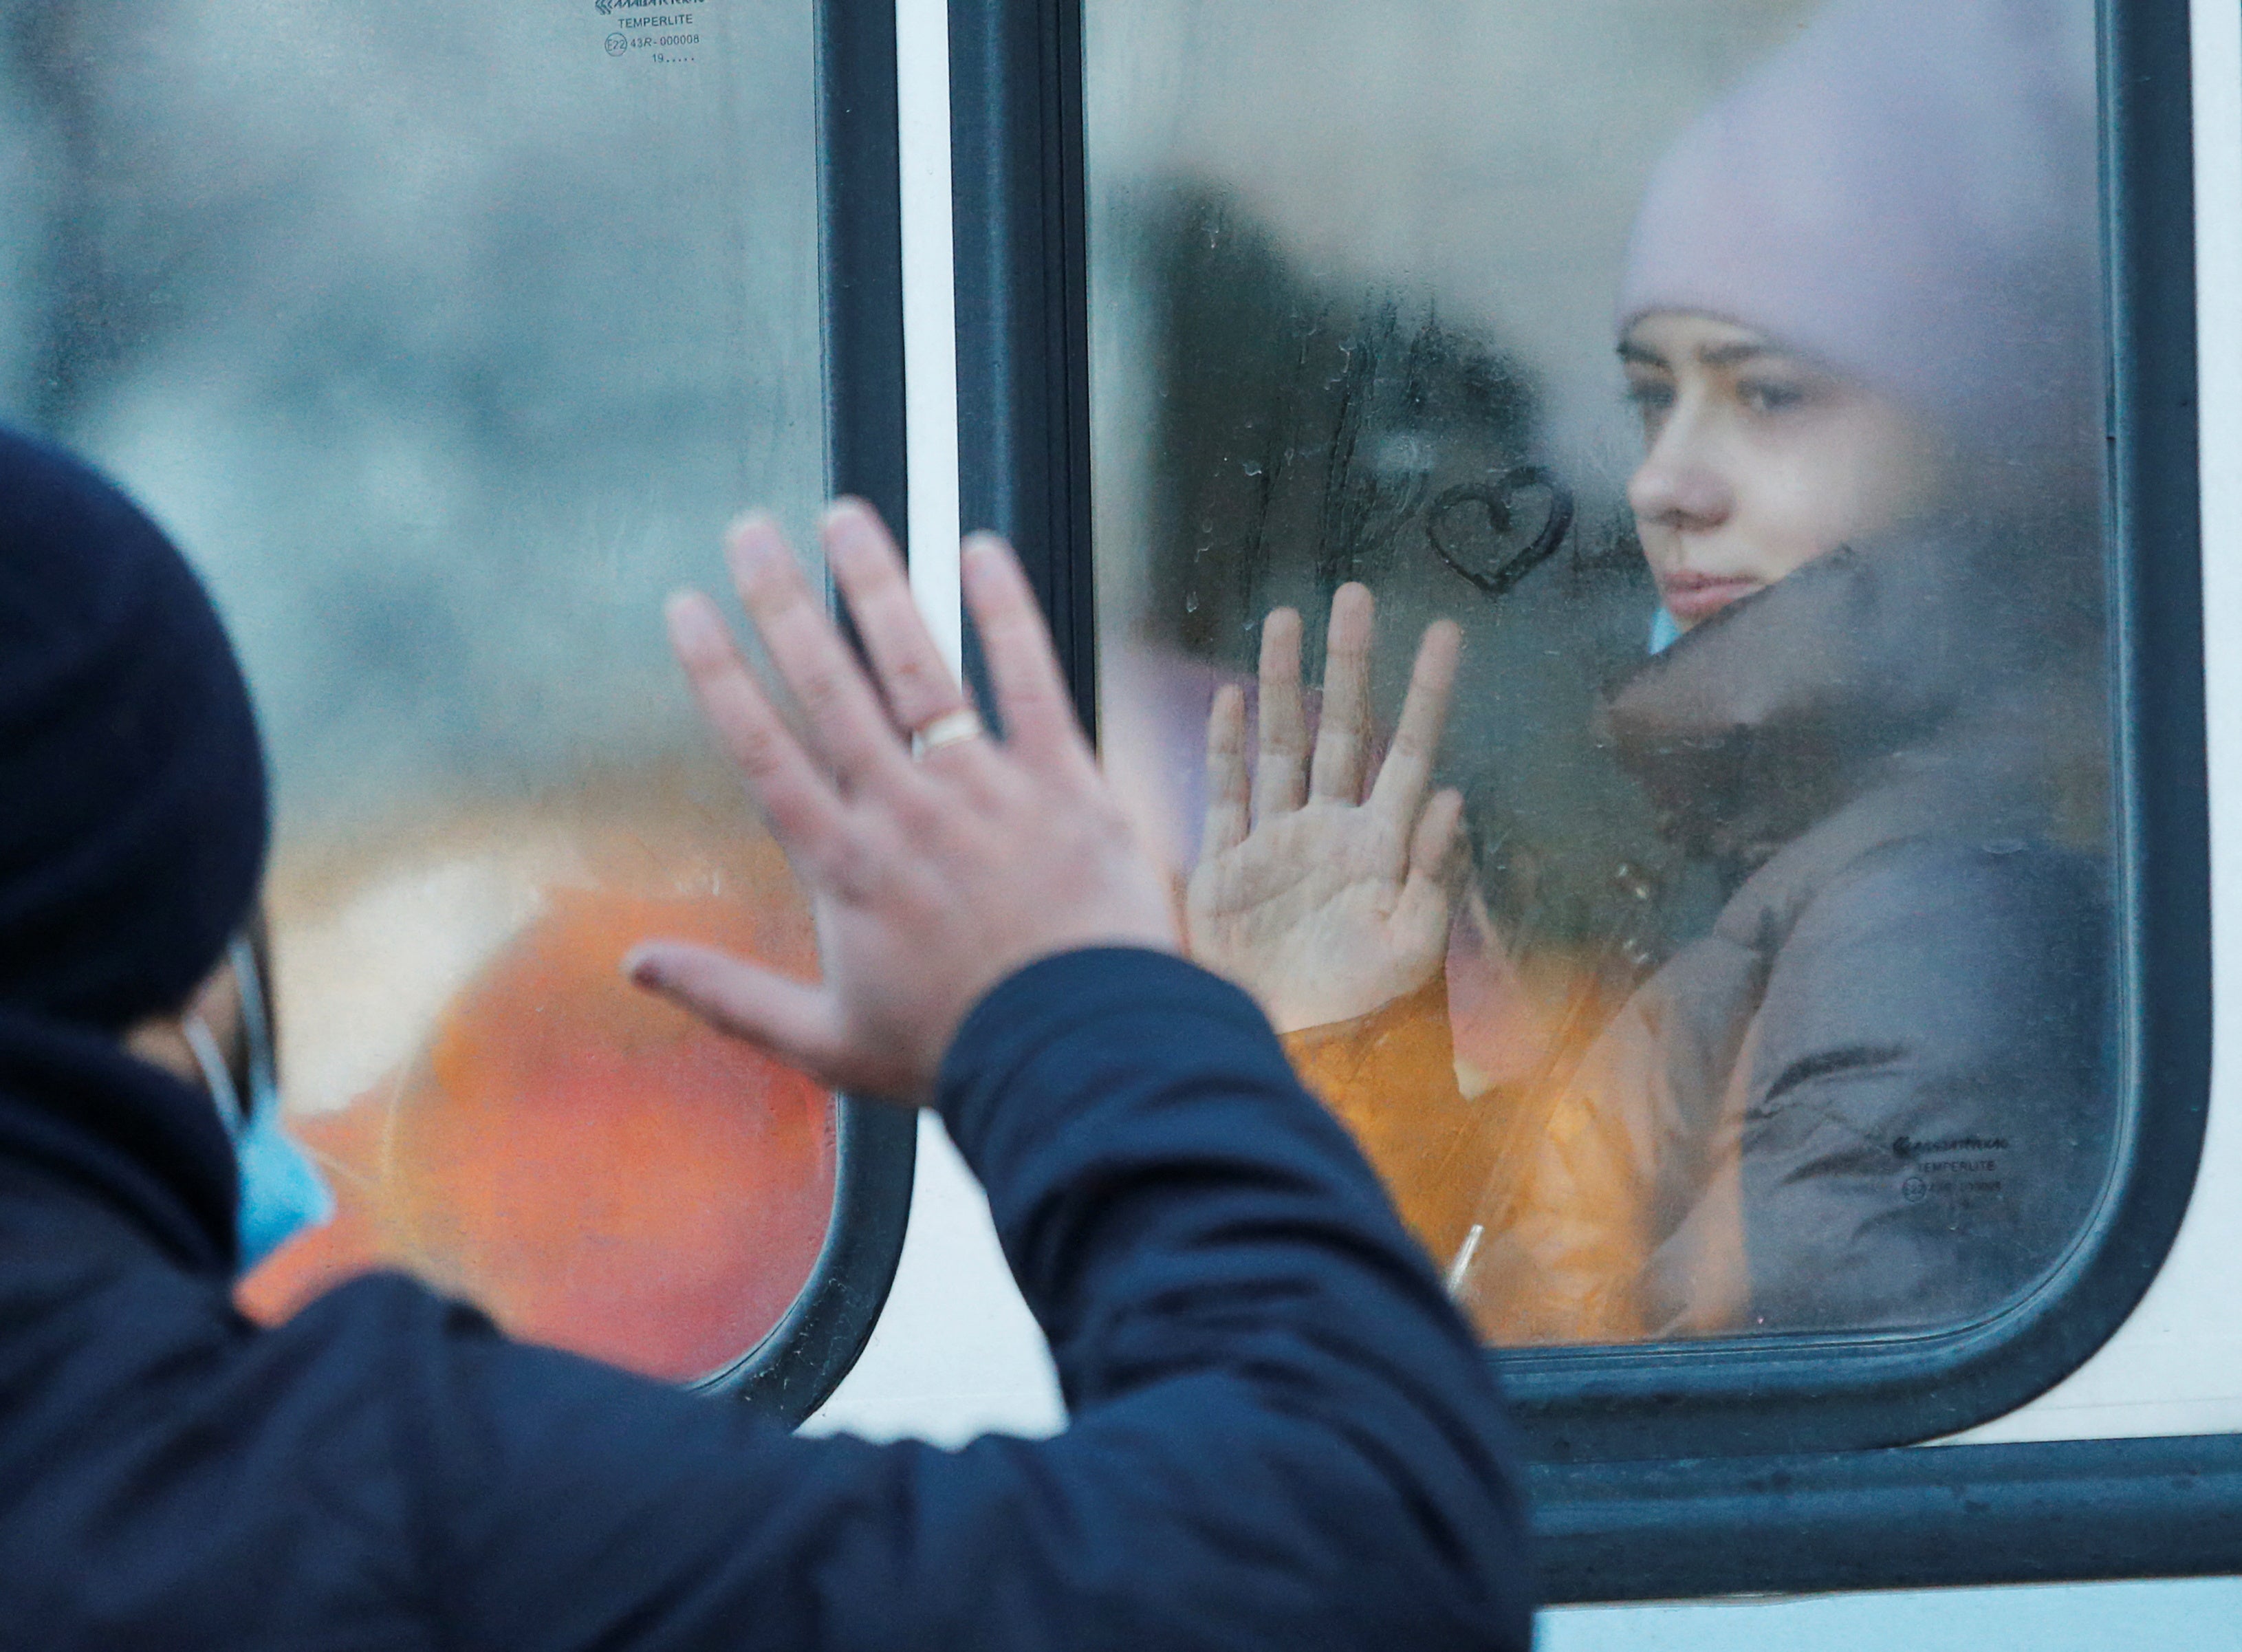 A man says goodbye to his daughter during the evacuation of local residents to Russia, in the rebel-controlled city of Donetsk, Ukraine, 19 February 2022